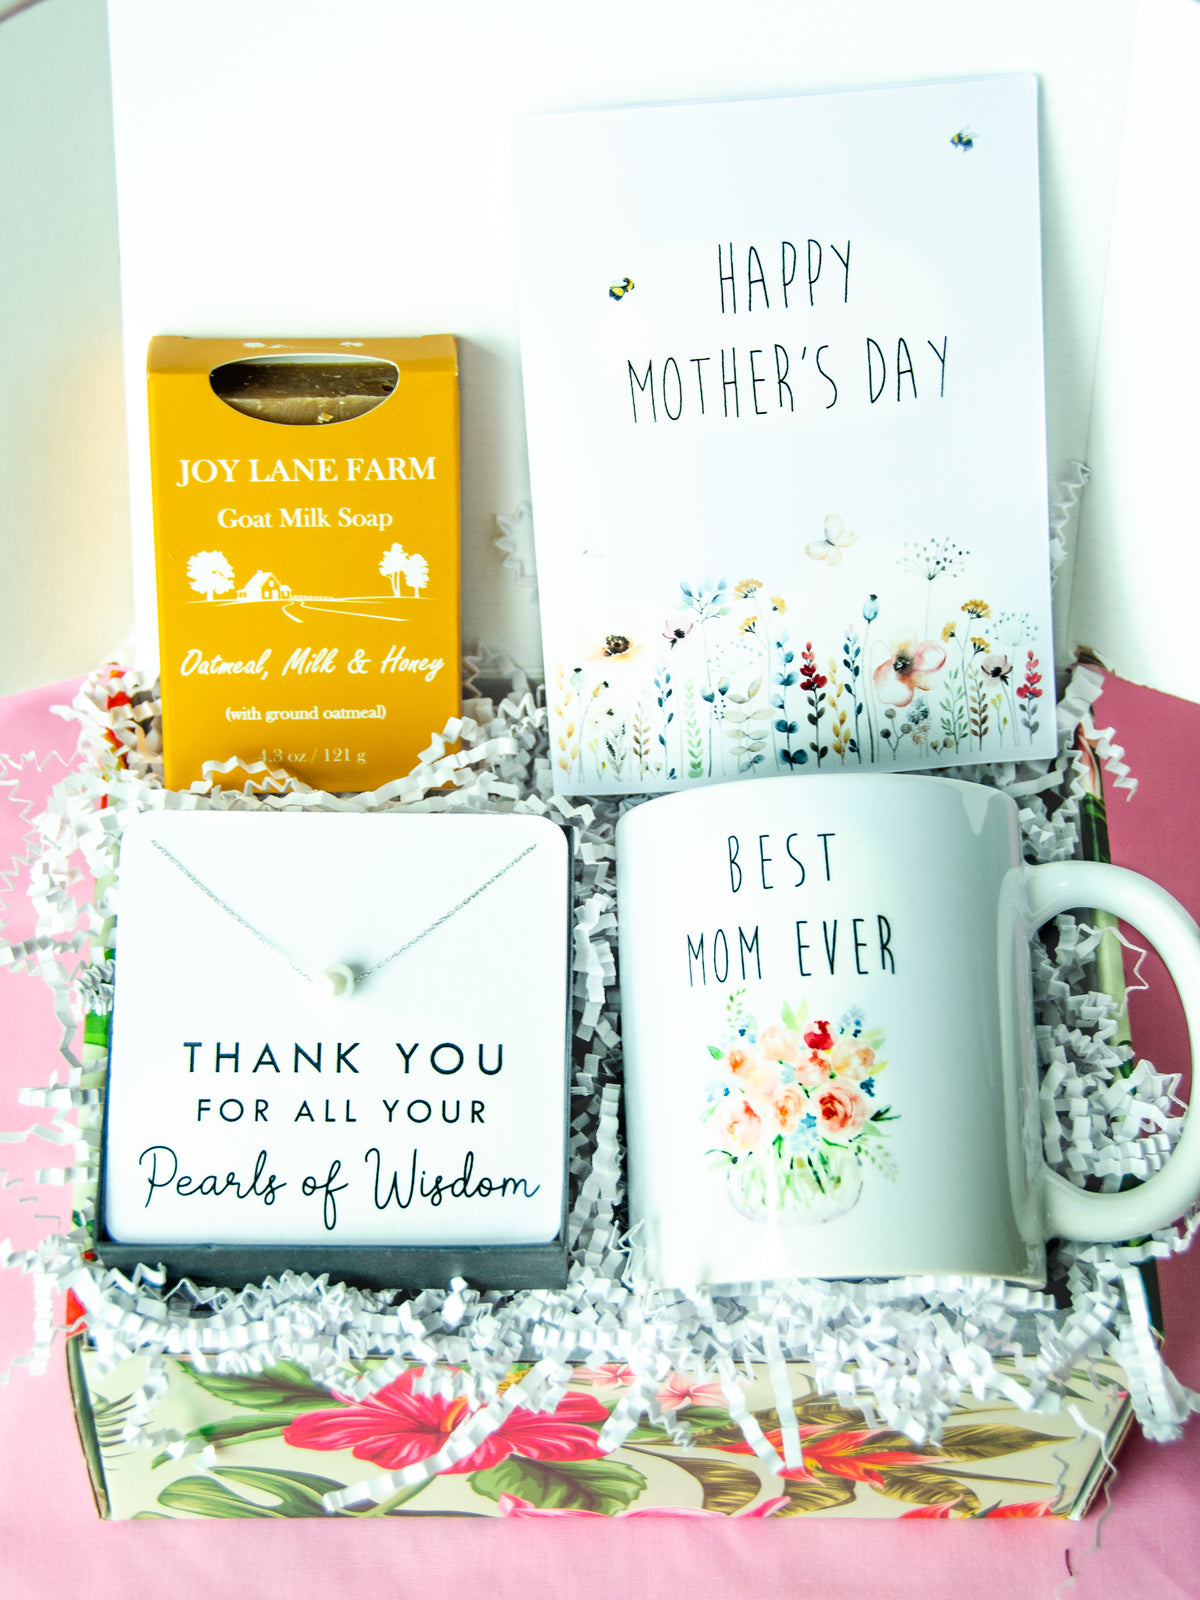 MOTHER`S DAY SPECIALTY COFFEE GIFT BOX